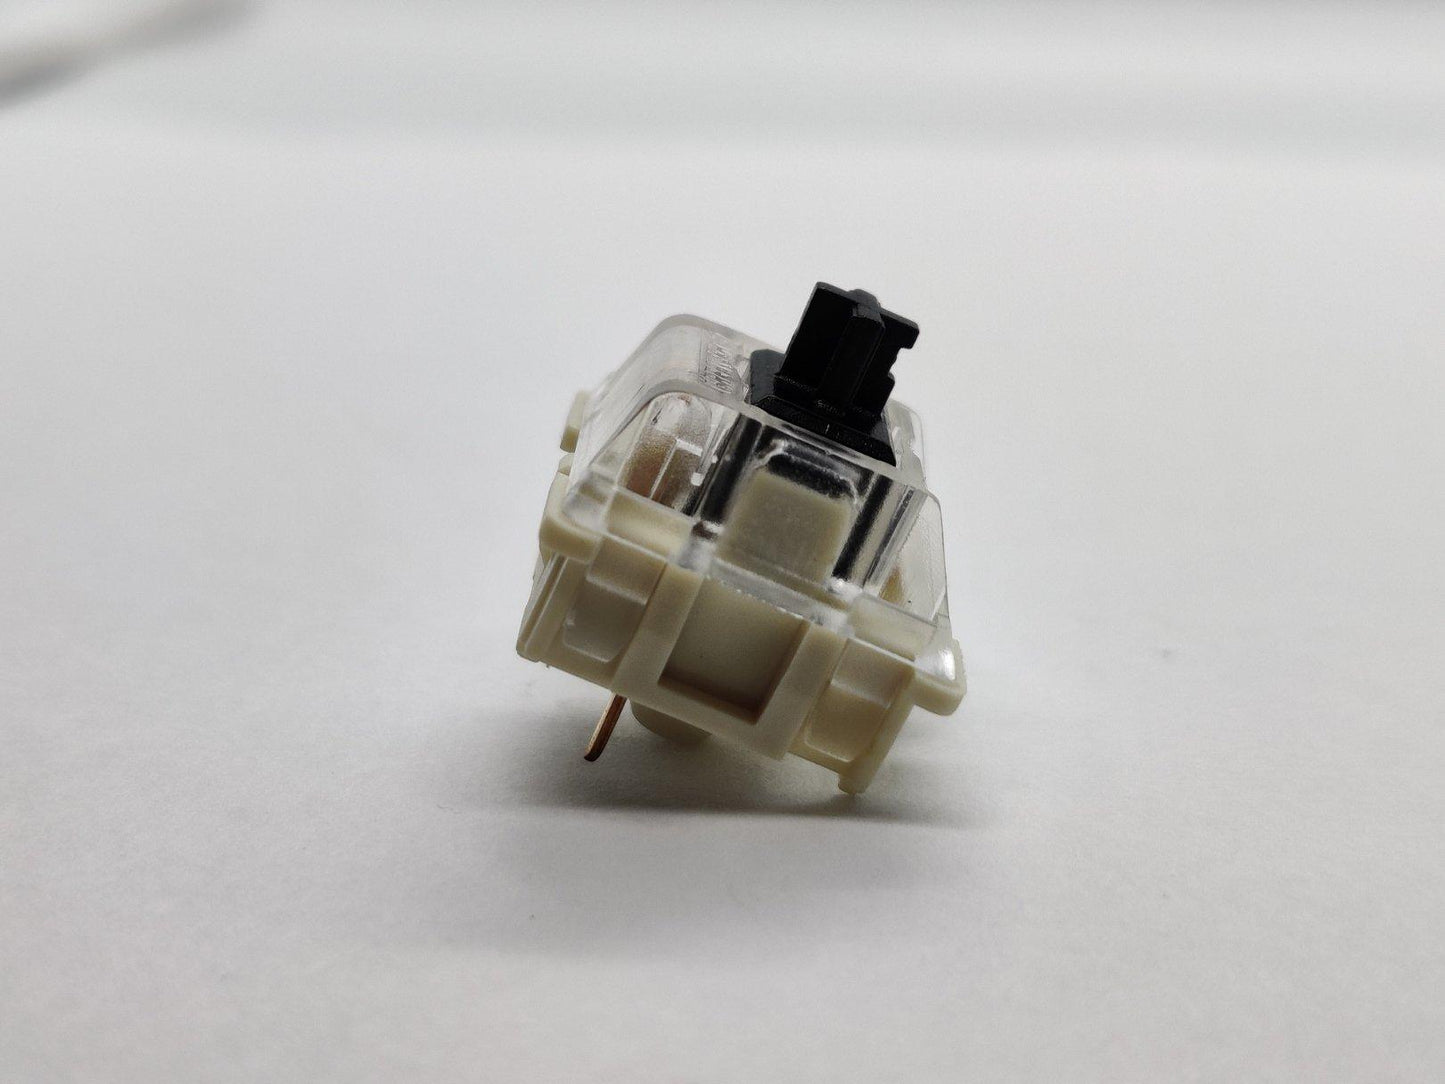 Greetech Black - White and Clear Housing - SMD - 3 pin